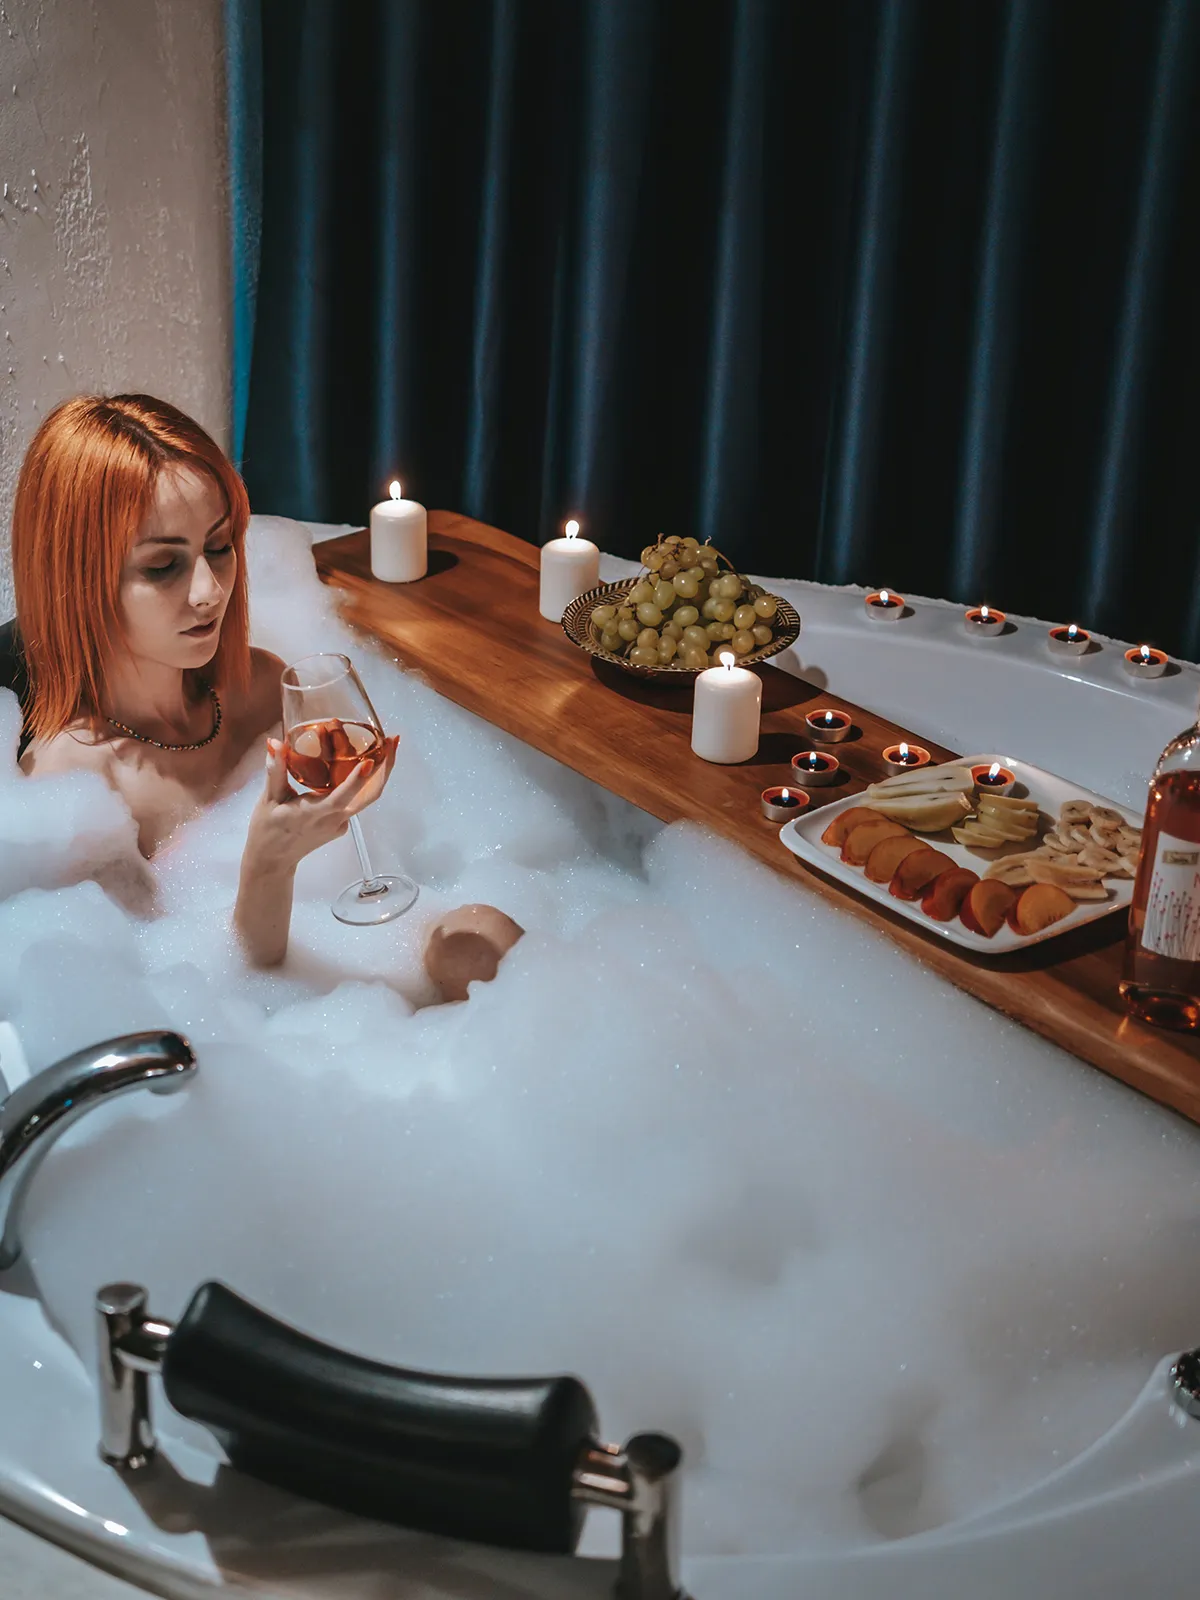 A woman is sitting in a bubble bath with a glass of wine.